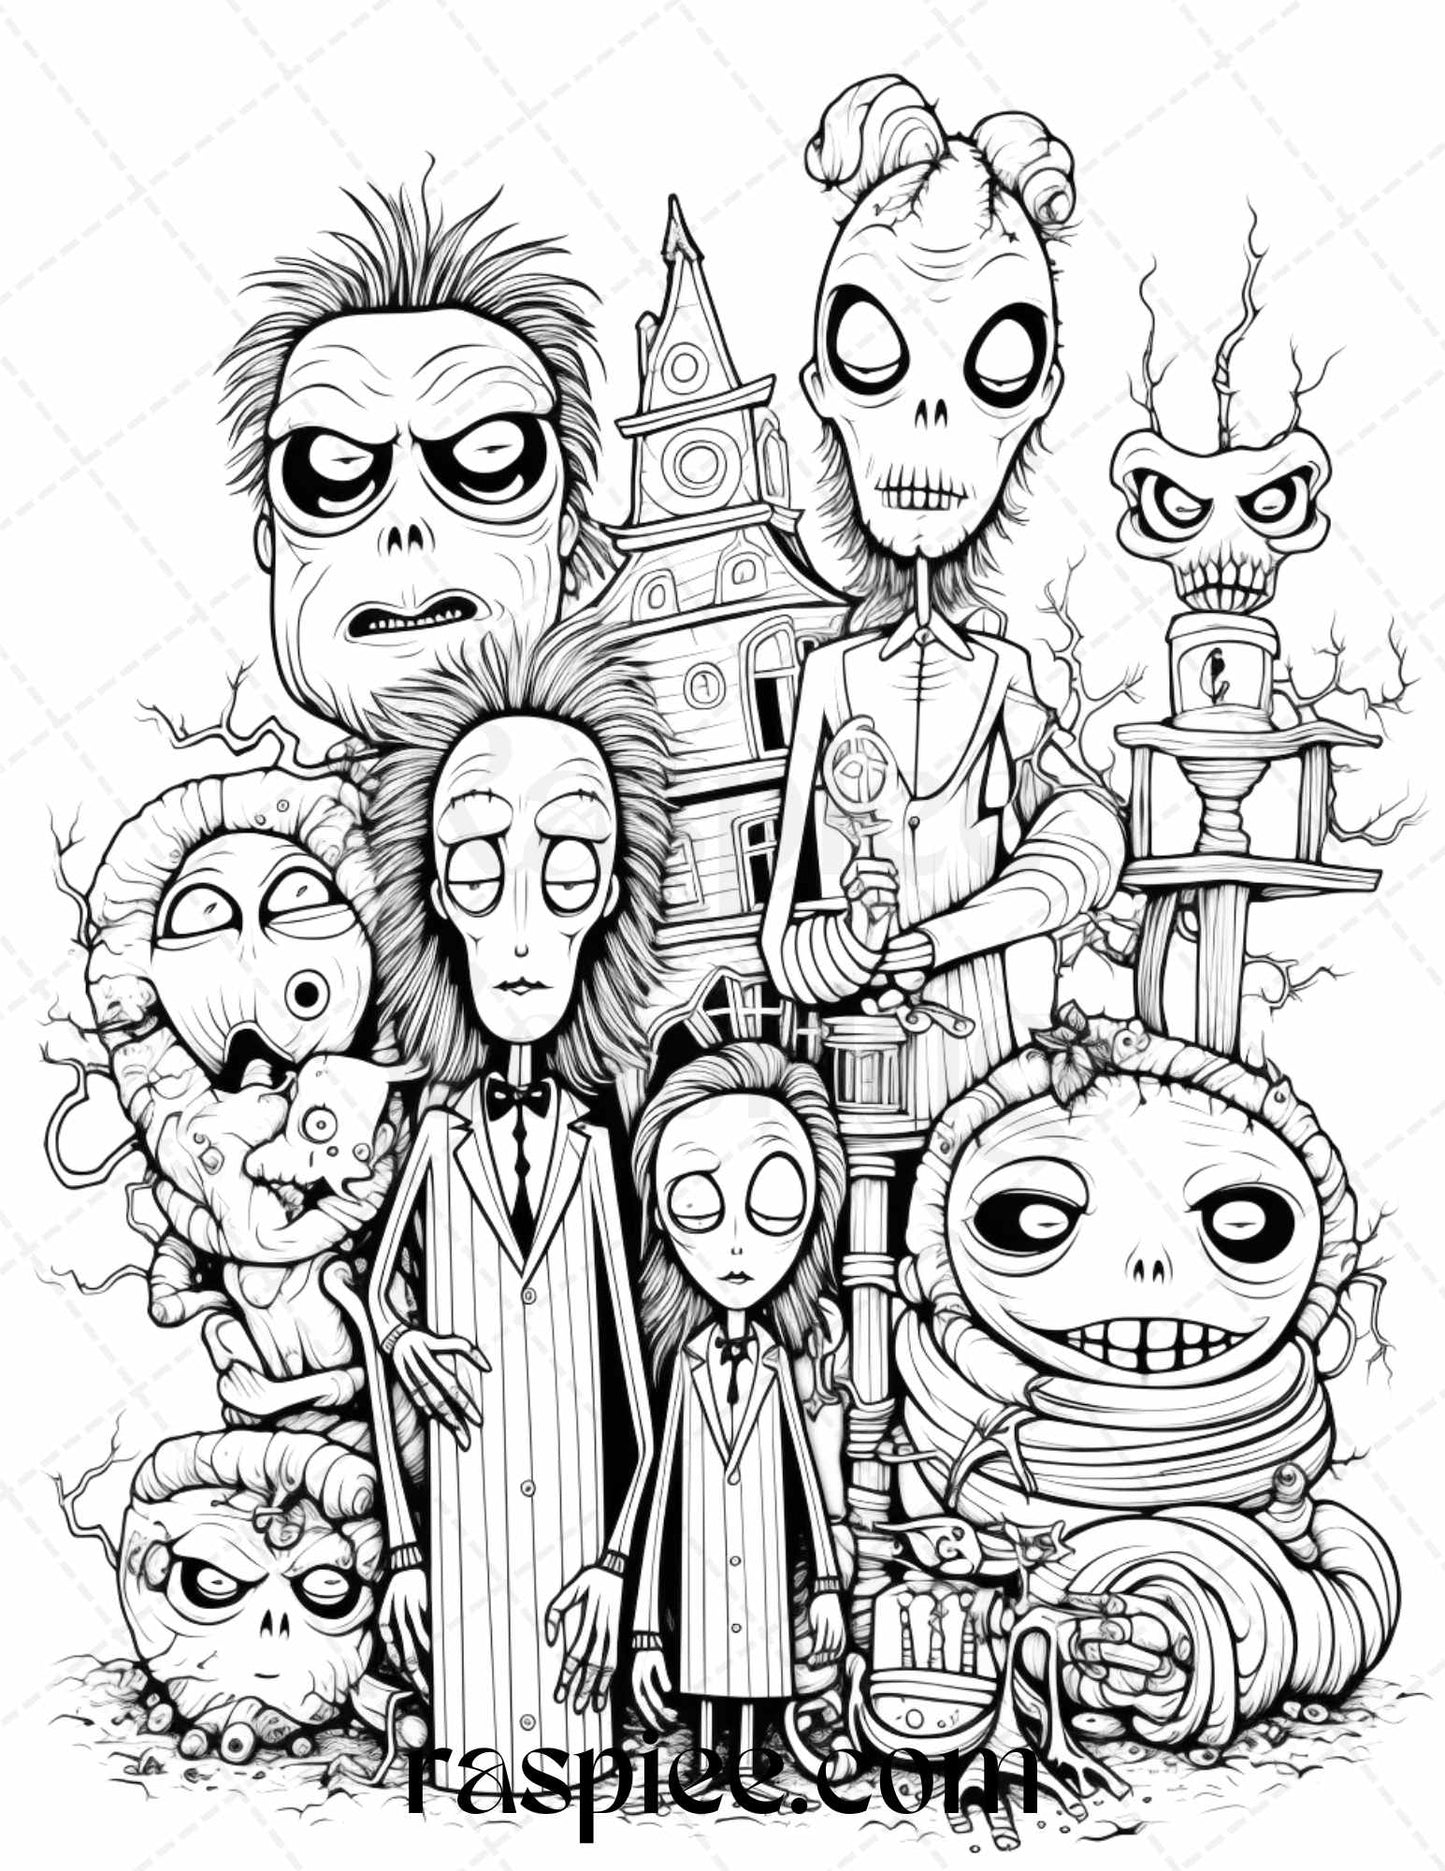 Monster Family Grayscale Coloring Page Printable for Adults, Halloween Coloring Book Instant Download, Fun and Spooky Grayscale Designs, Adult Coloring Pages High-Resolution Art, Scary Creatures Halloween Coloring Sheet